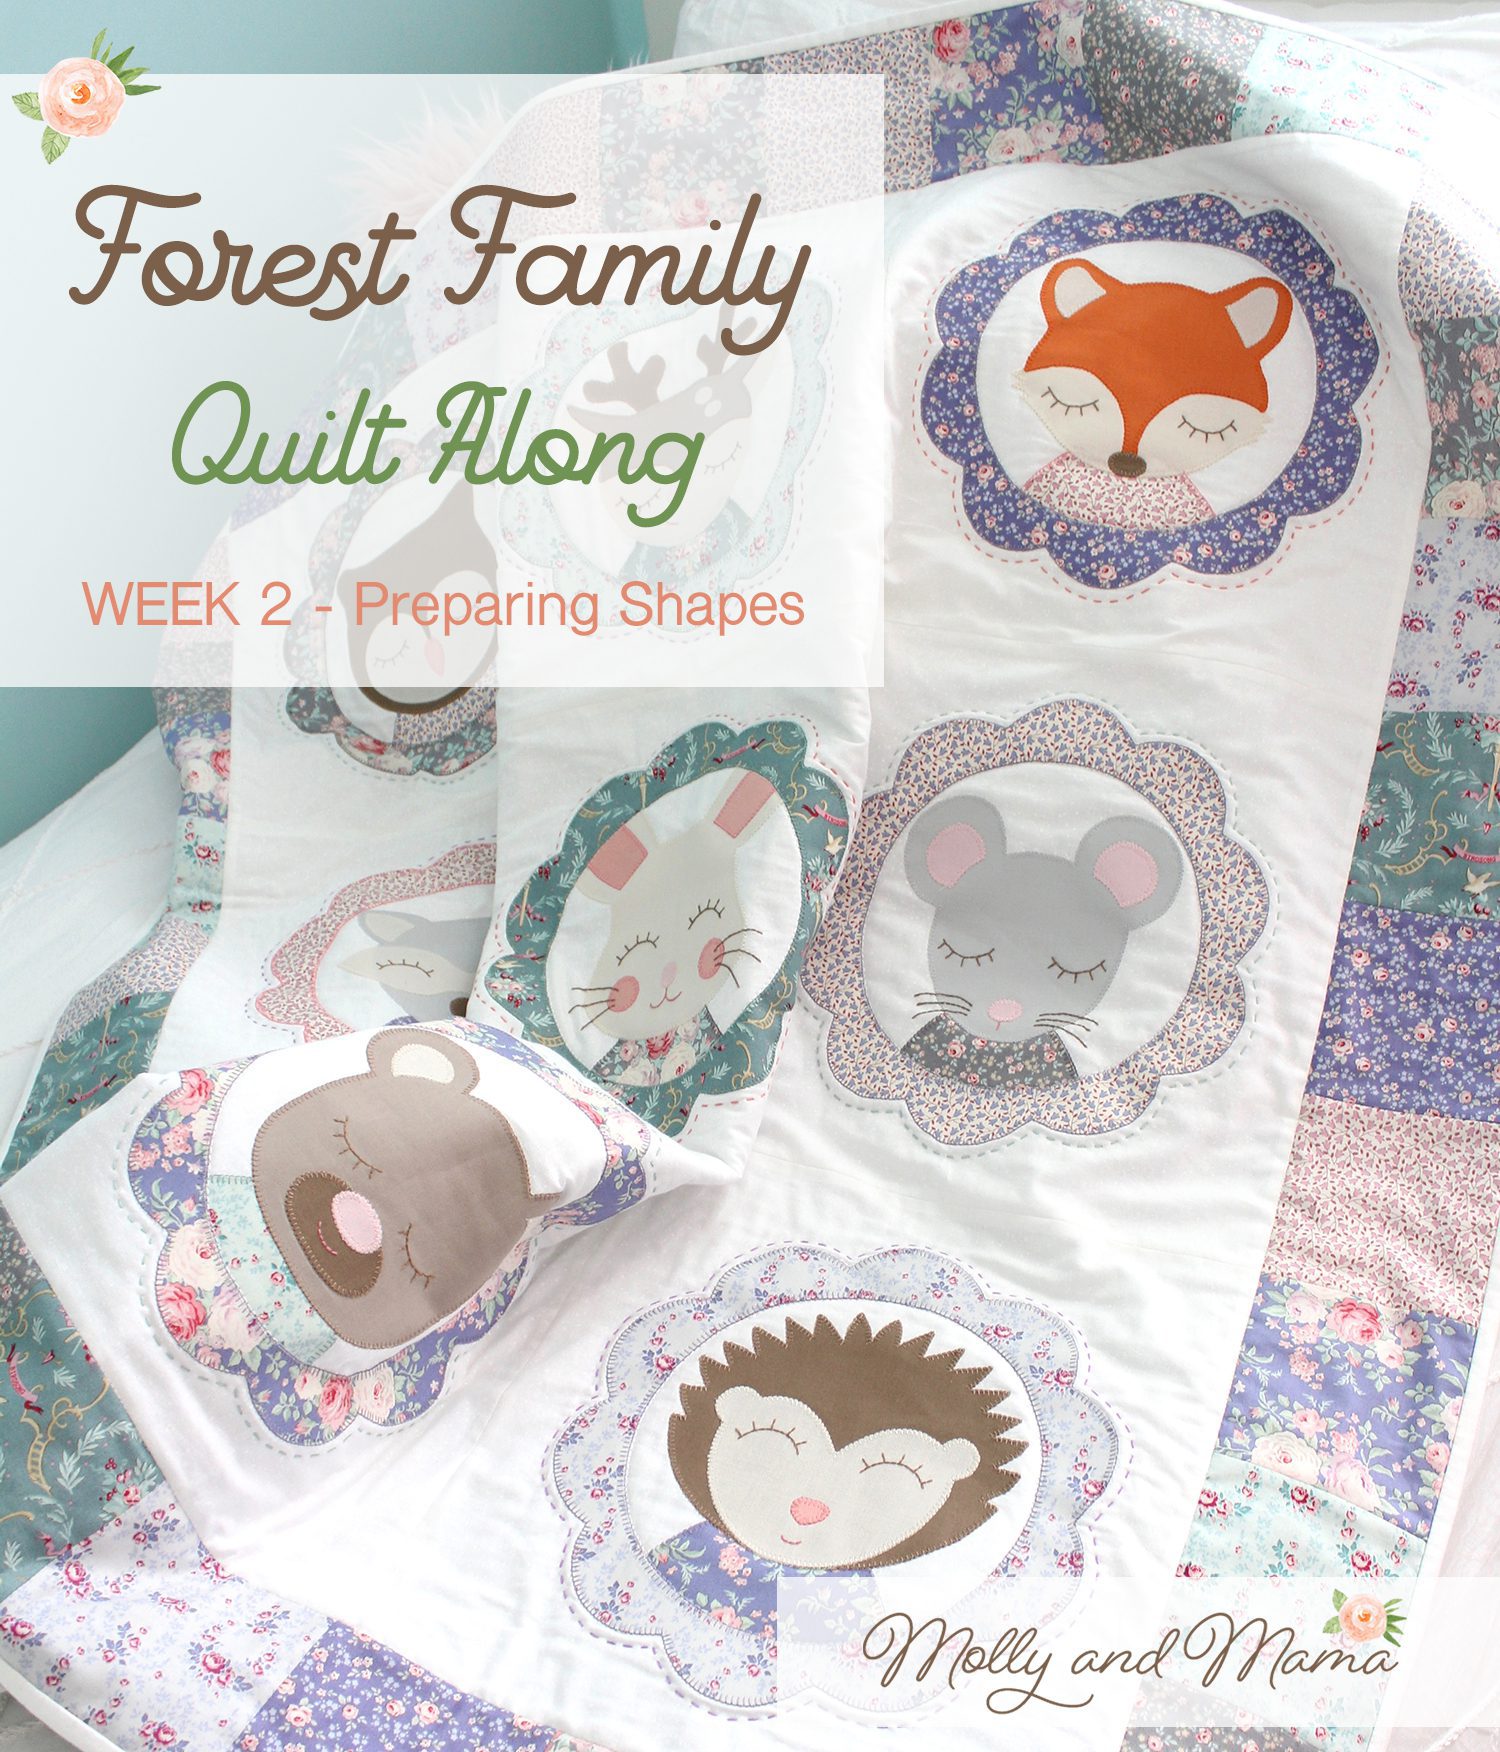 Week 2 – Forest Family Quilt Along